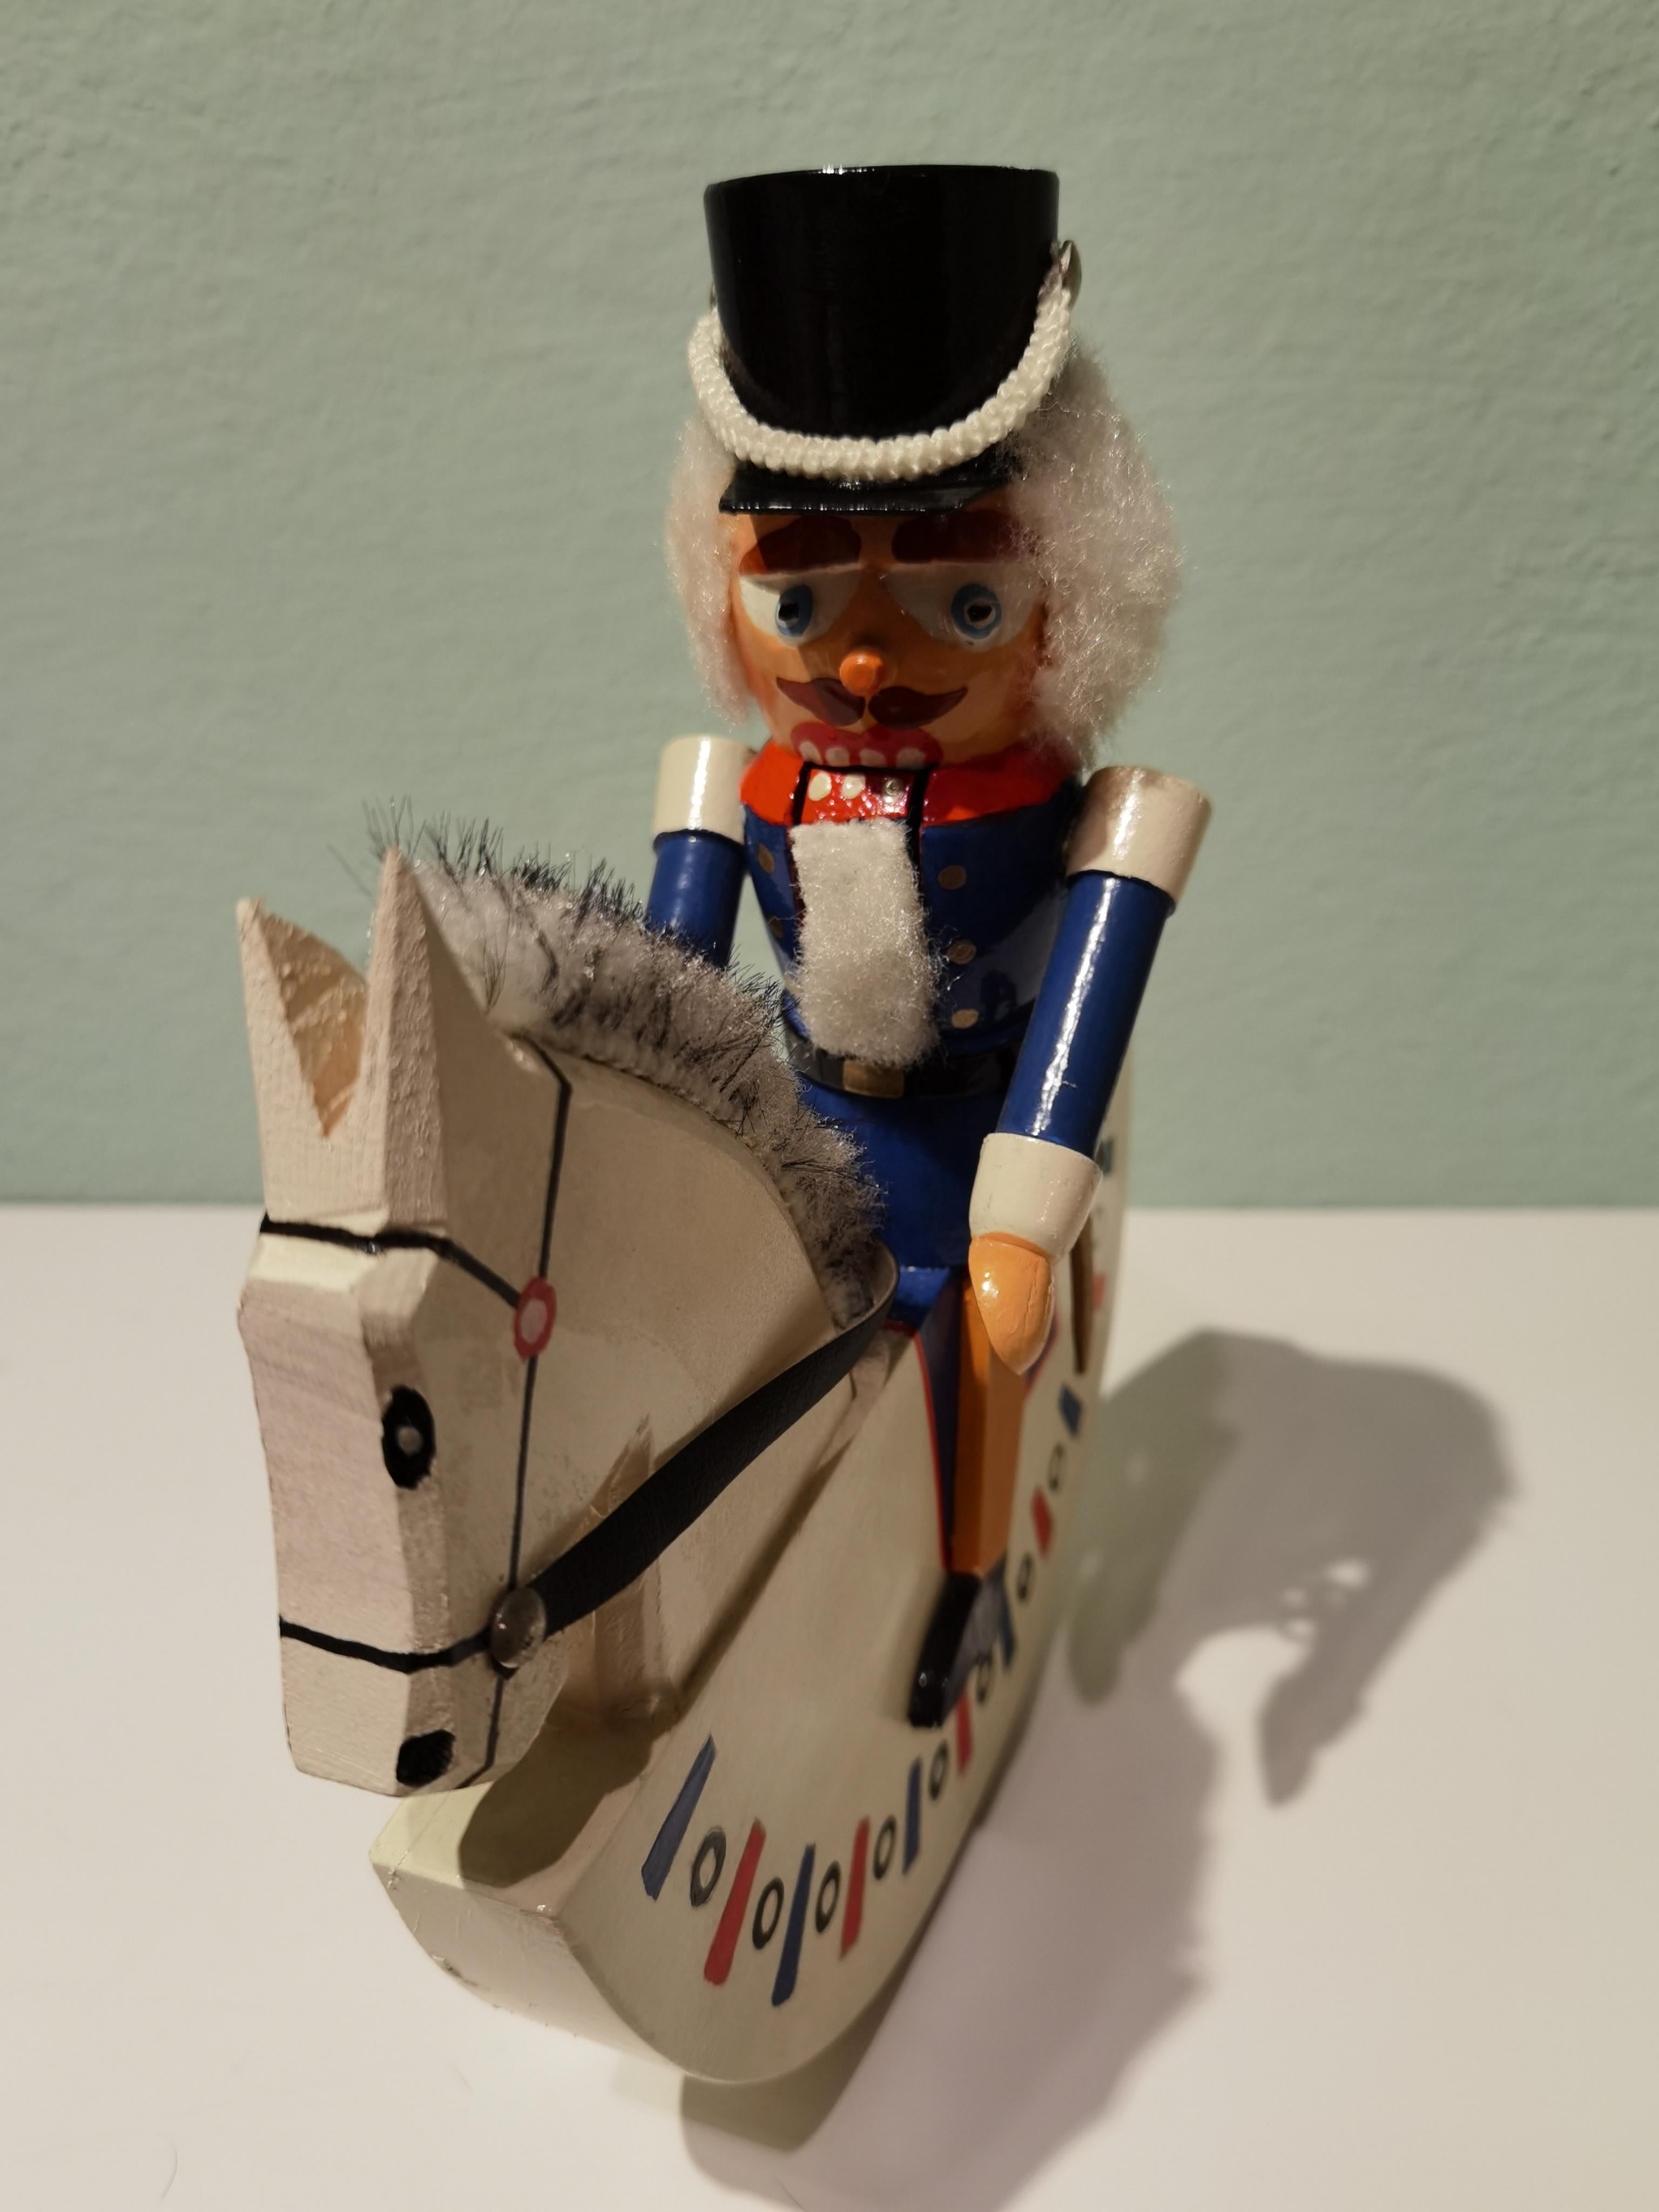 Rare wooden nutcracker figure from the Erzgebirge. The region Erzgebirge formerly Eastern Germany is famous for this special kind of nutcrackers where intricate carving has been their home. Completely handmade in wood and hand-painted in bright red